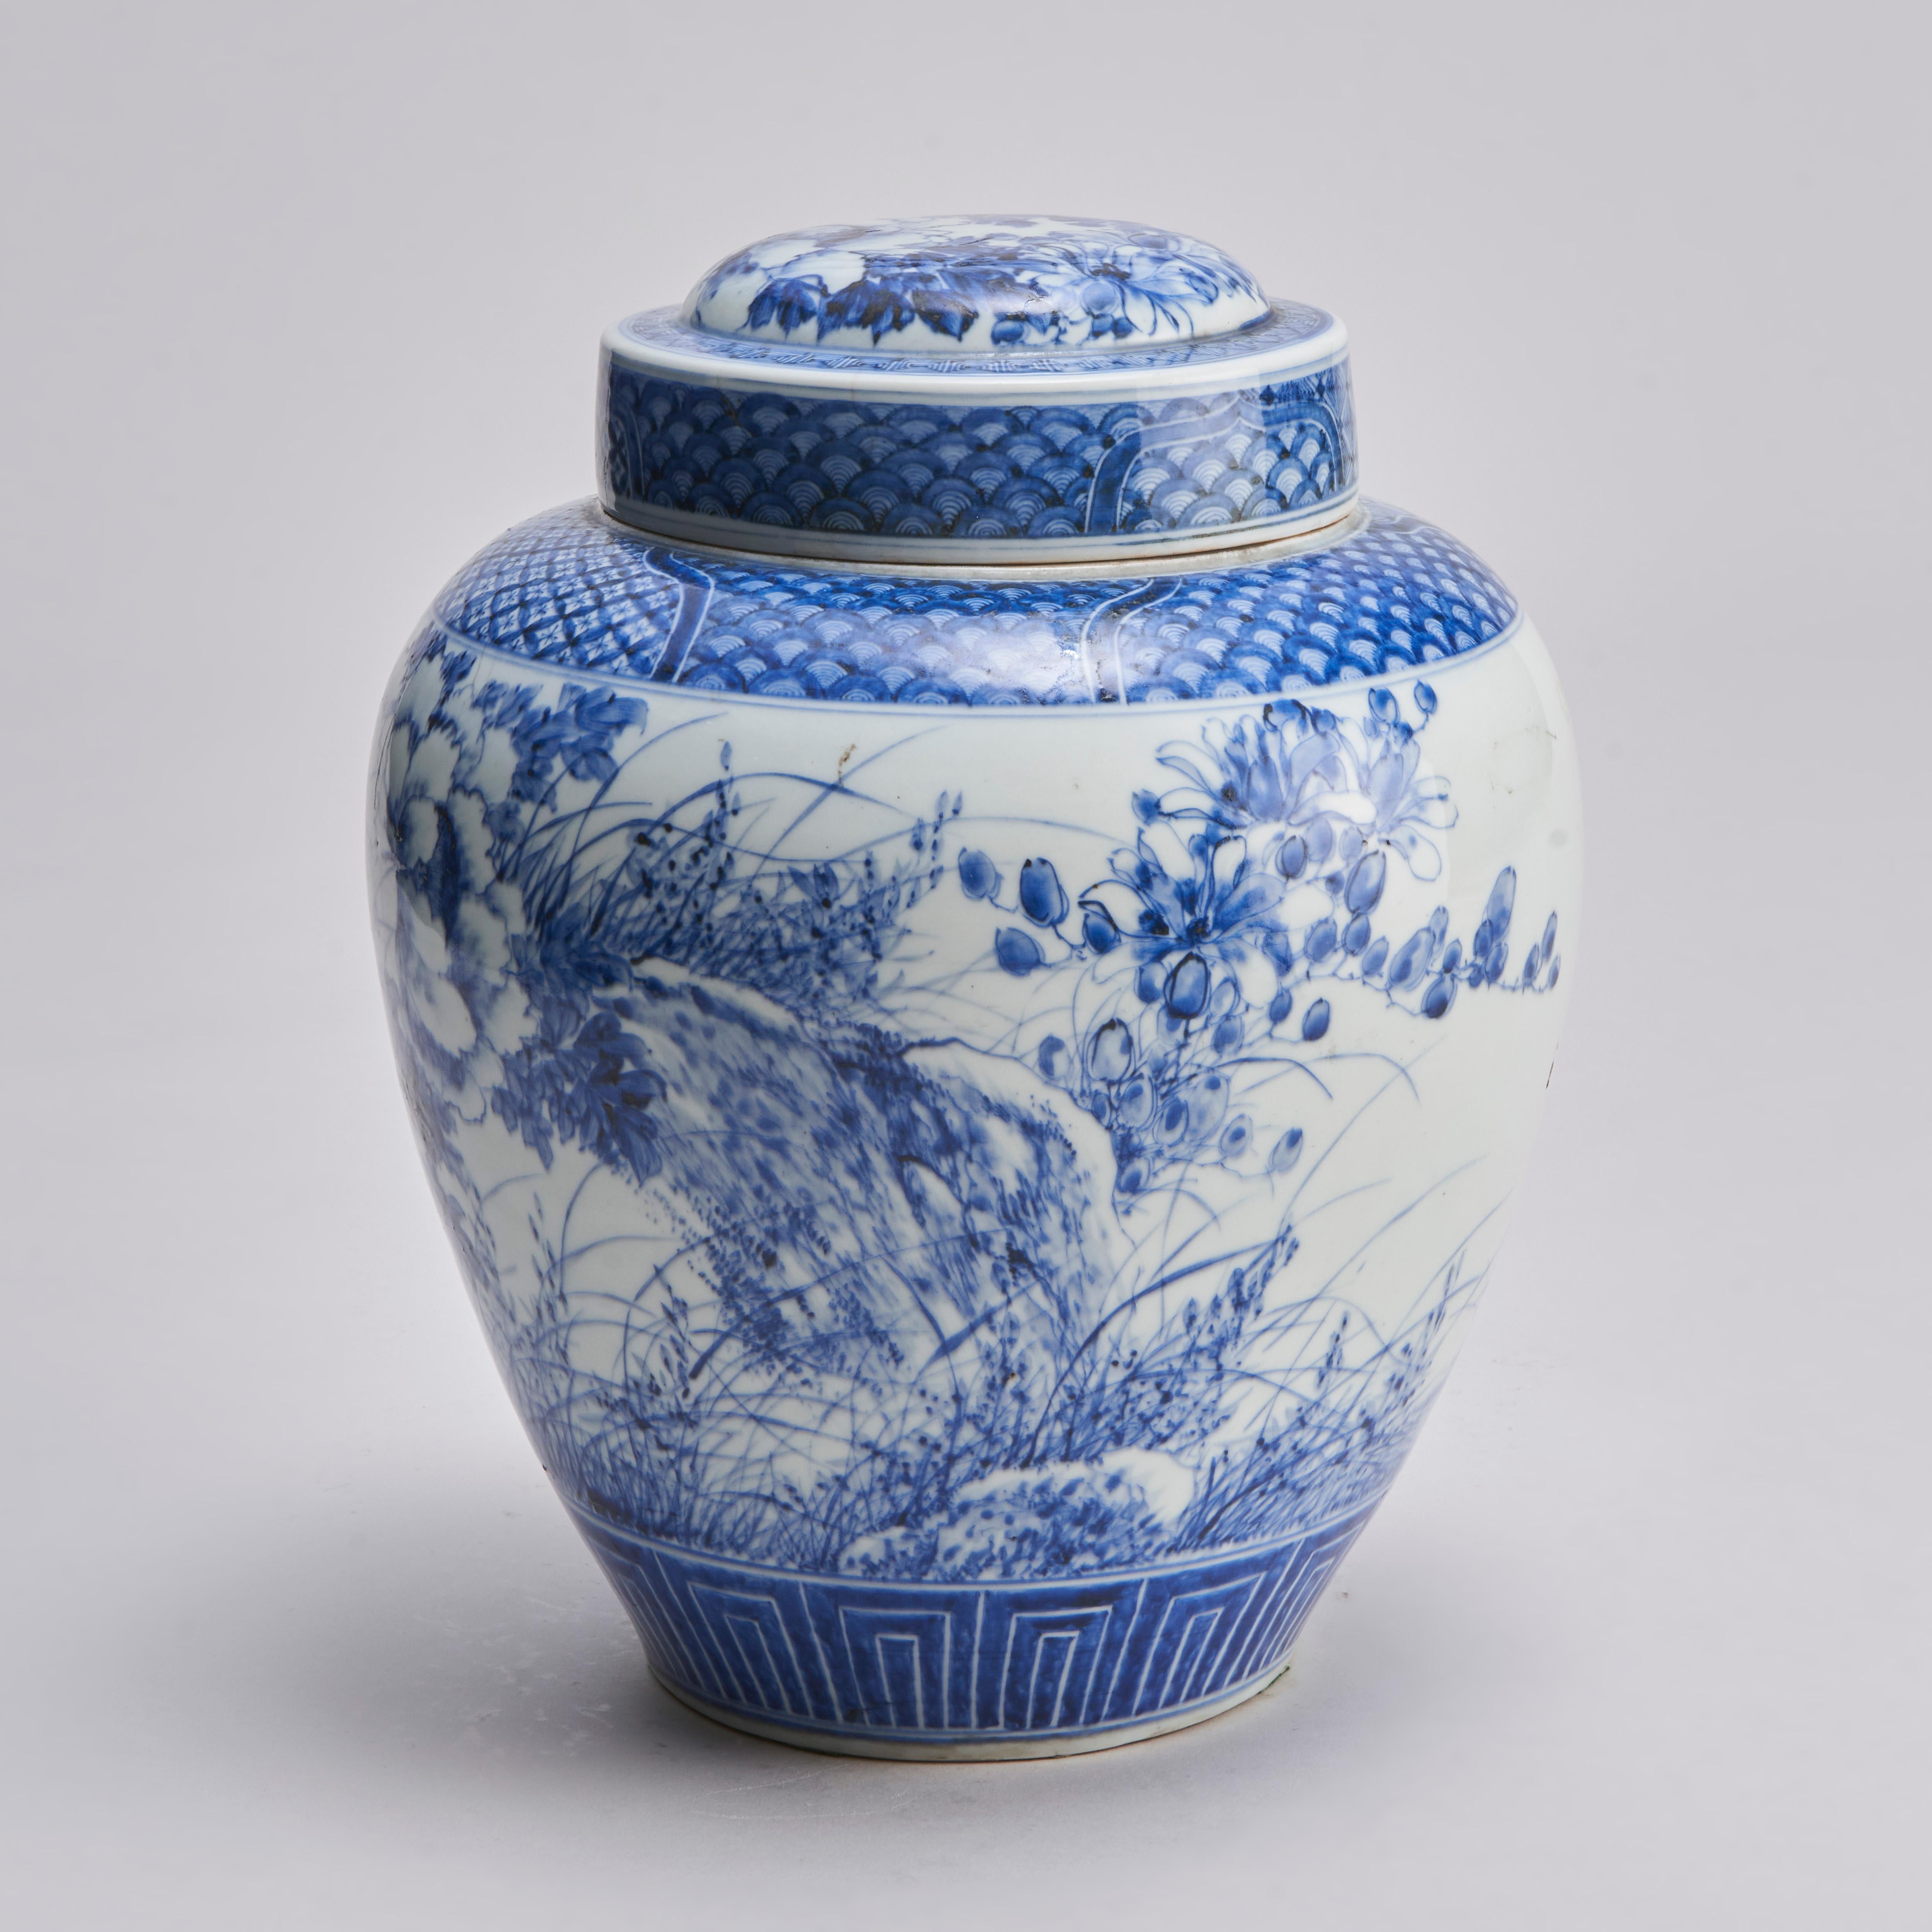 An unusual Japanese porcelain blue and white jar with inner stopper In Good Condition For Sale In London, GB